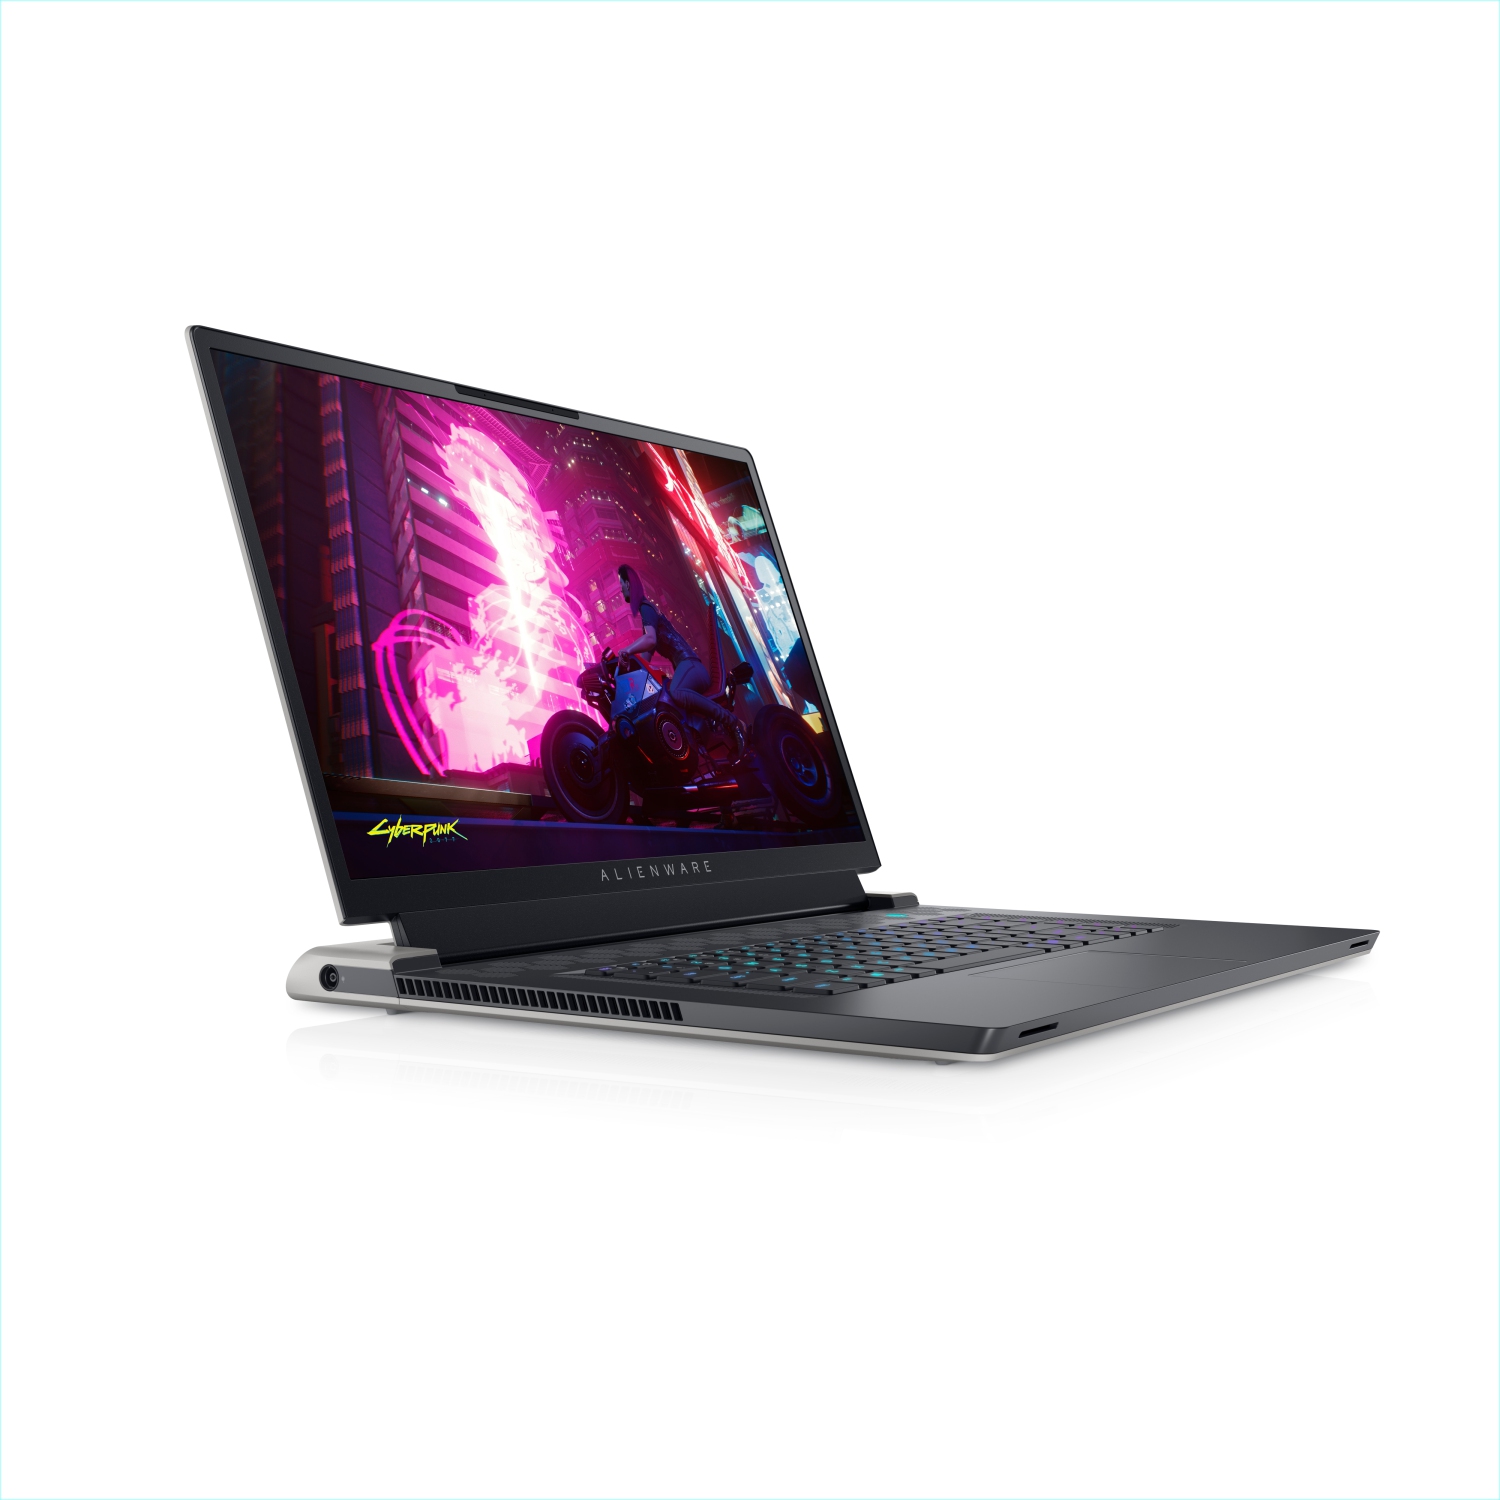 Refurbished (Excellent) - Dell Alienware X17 R1 Gaming Laptop (2021), 17.3" FHD, Core i9, 2TB SSD, 32GB RAM, RTX 3080, 8 Cores @ 5 GHz, 11th Gen CPU Certified Refurbished